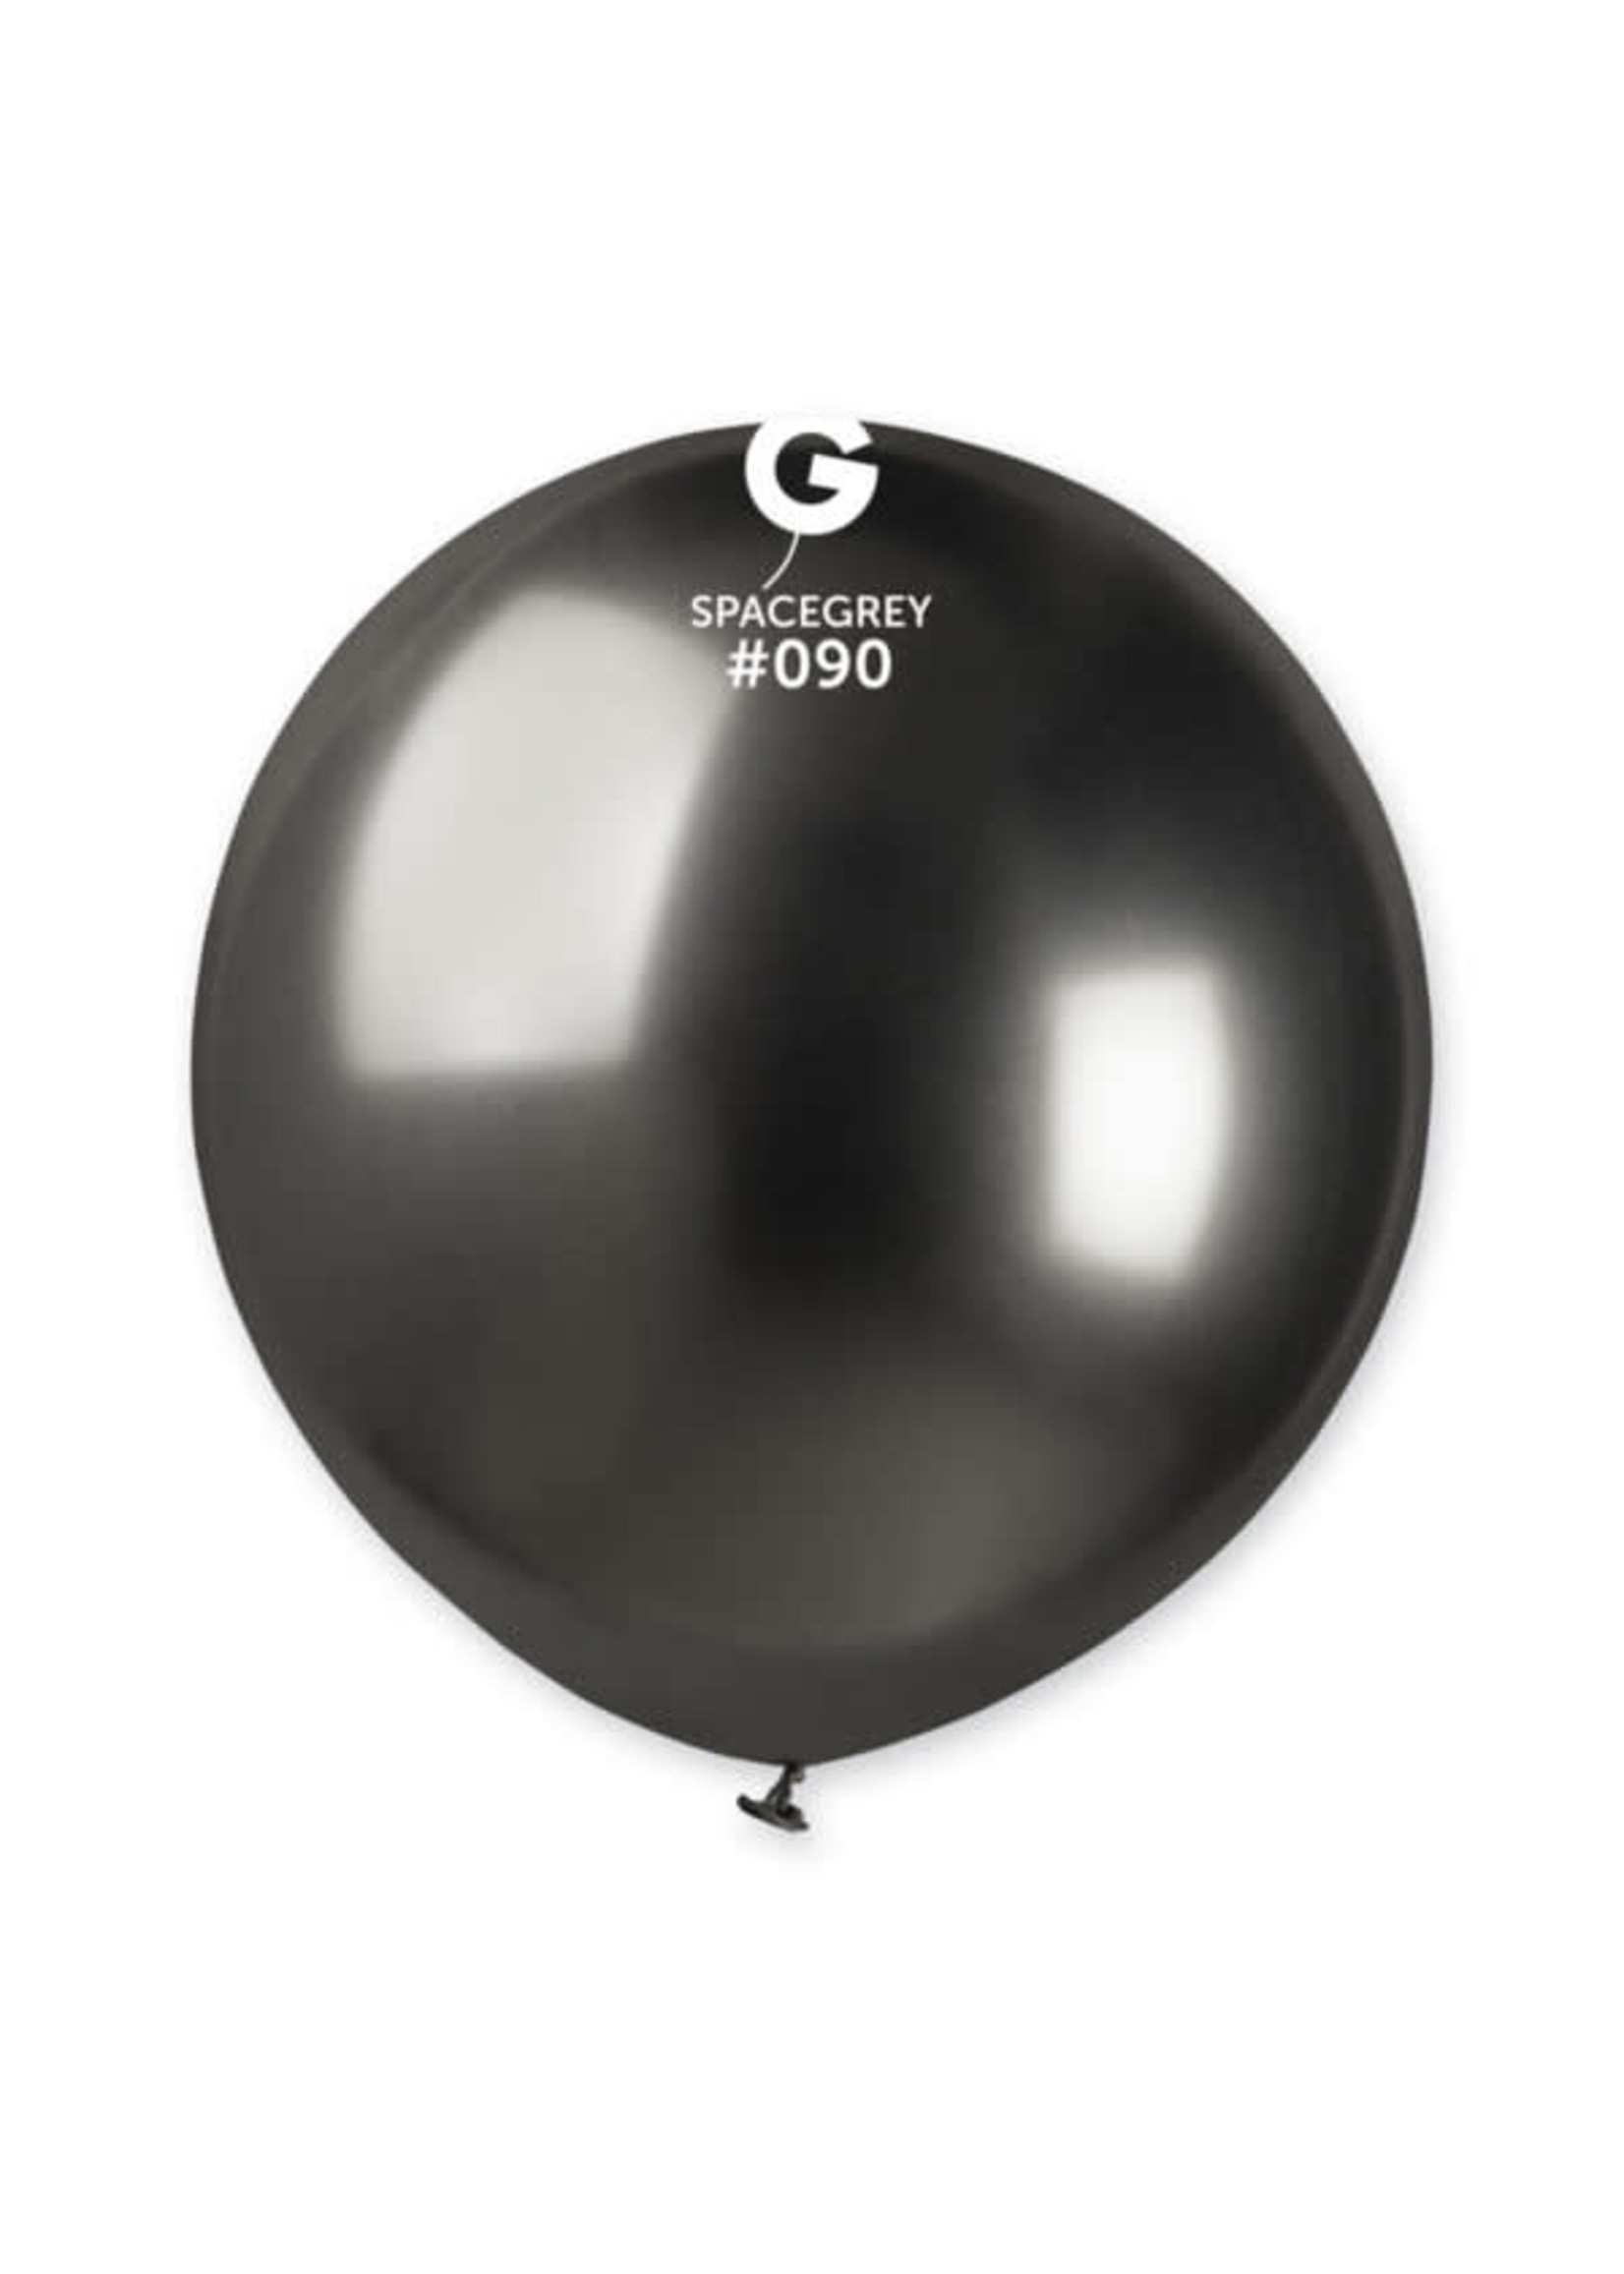 GEMAR Shiny Space Grey #090 Latex Balloons, 19in, 25ct